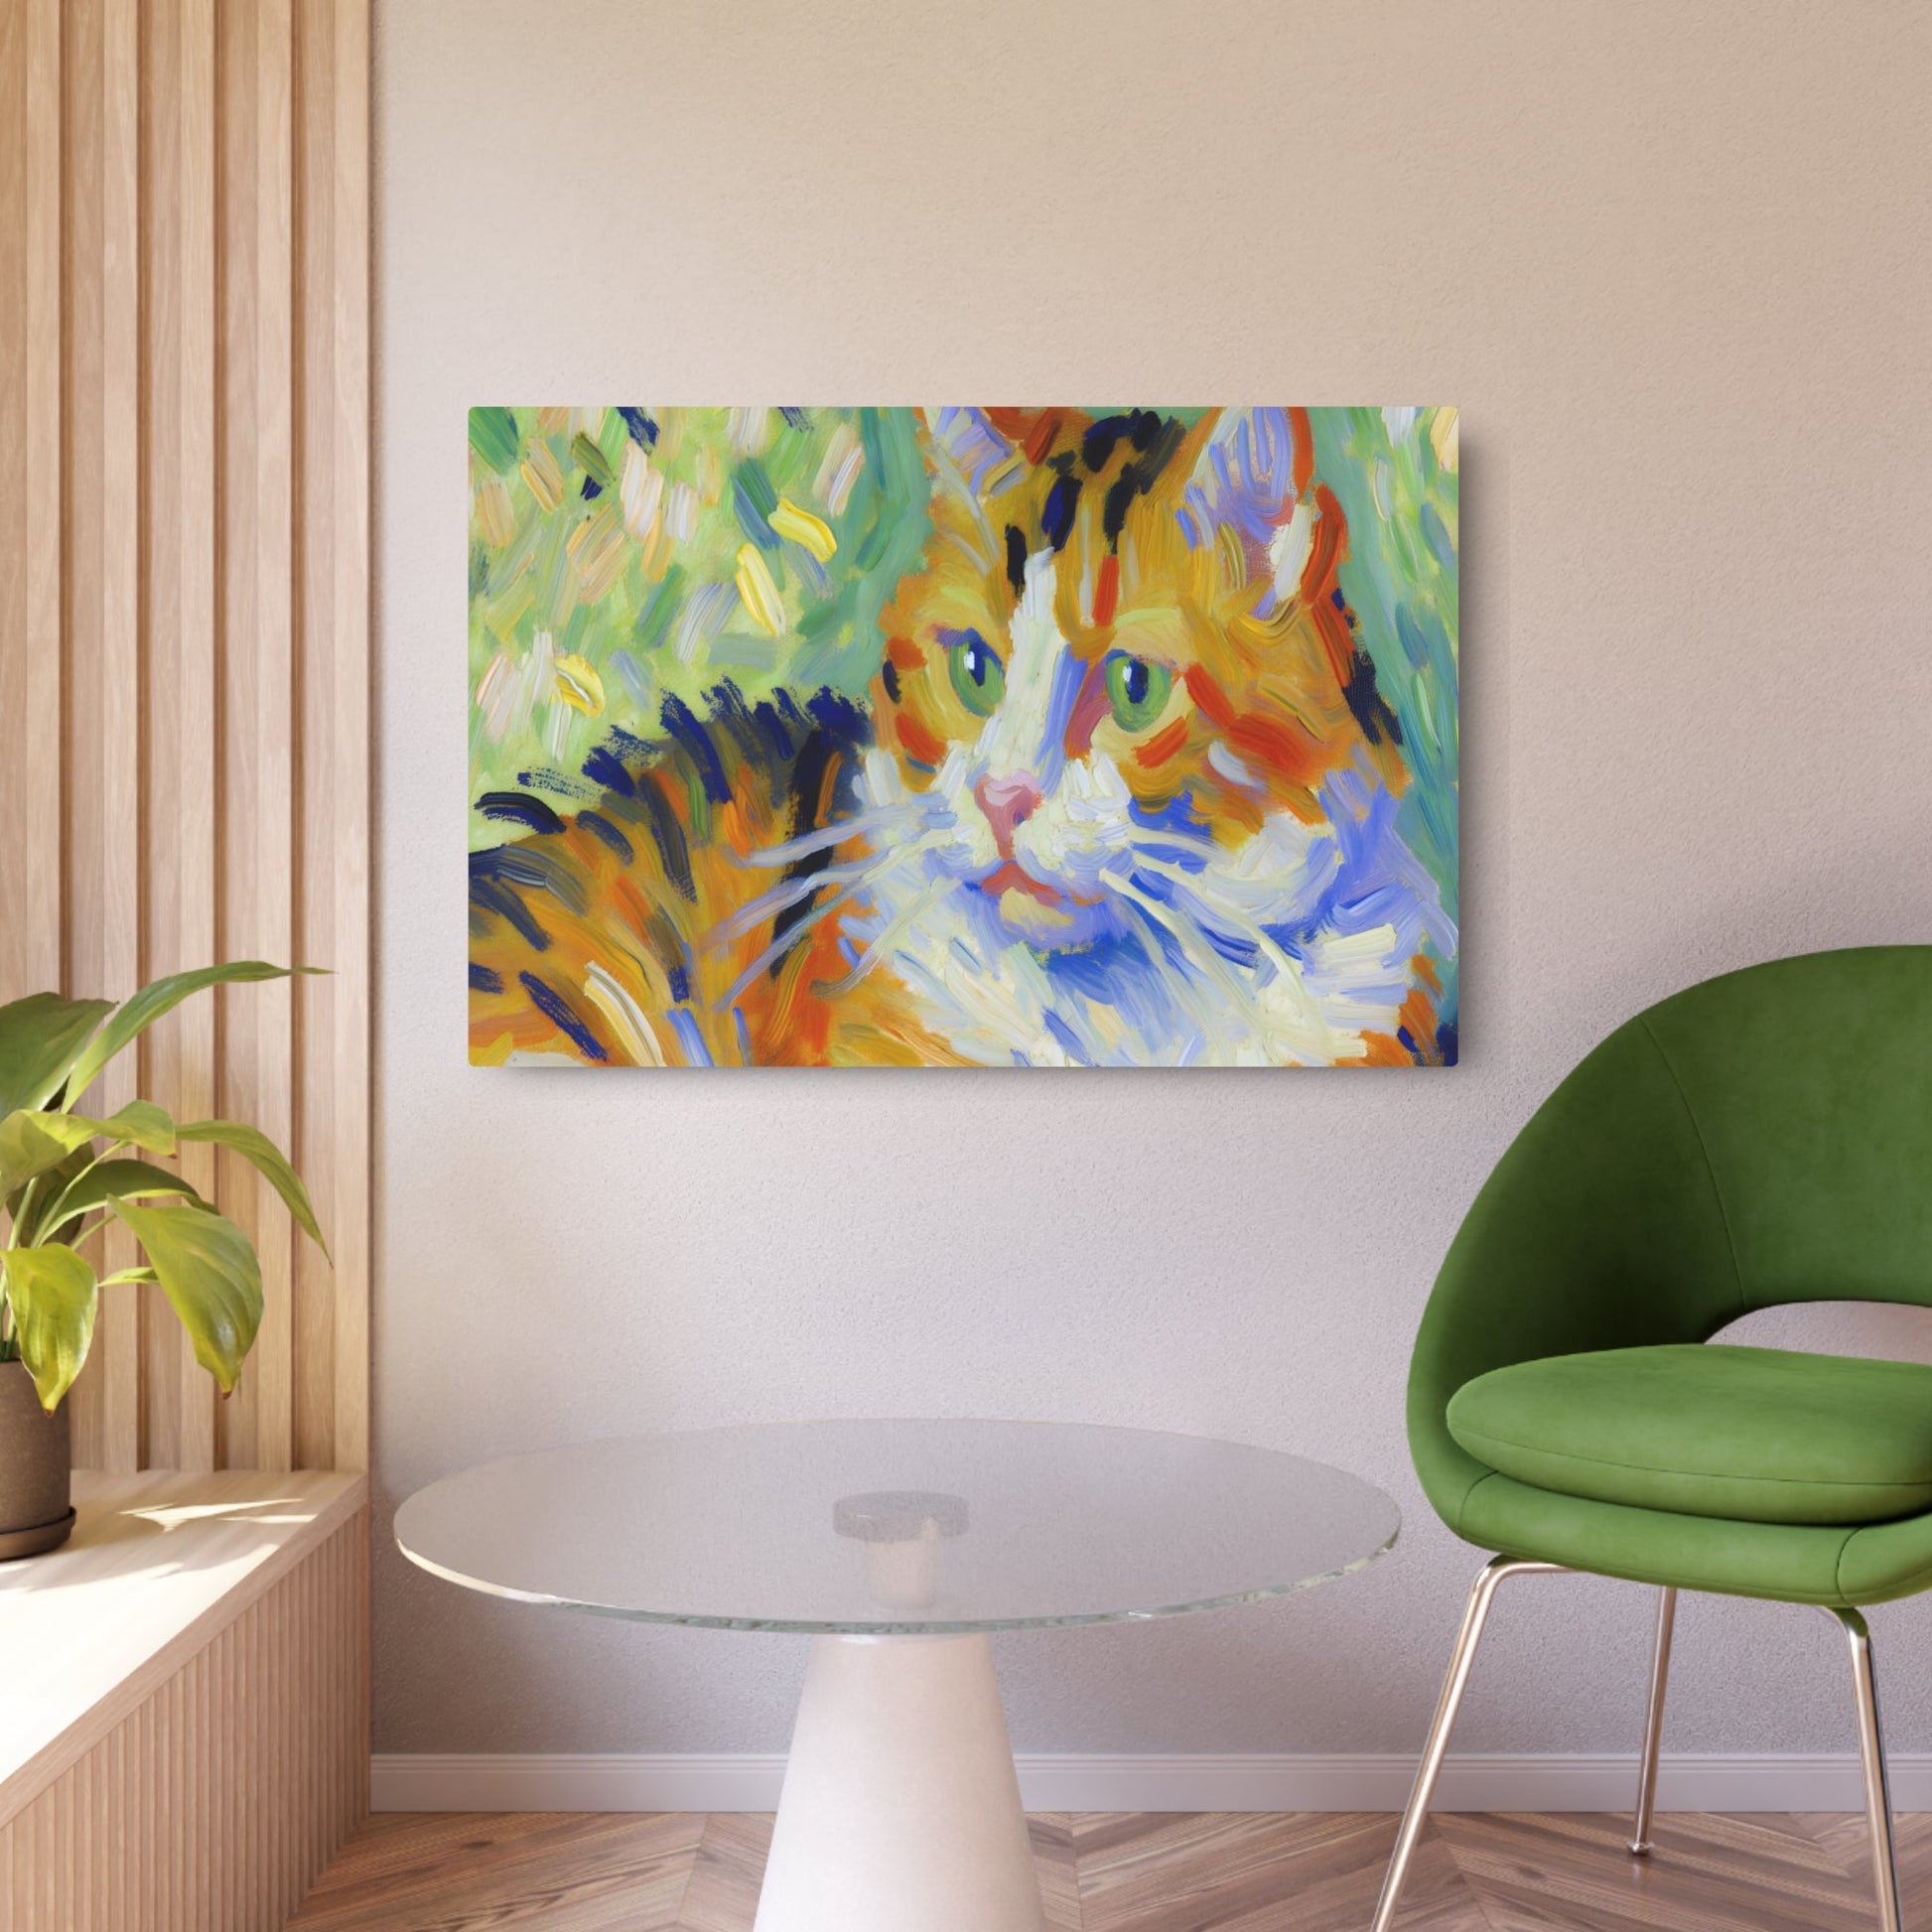 Metal Poster Art | "Vibrant Post-Impressionist Cat Painting - Expressive Colors & Visible Brushwork in Western Art Styles Collection" - Metal Poster Art 36″ x 24″ (Horizontal) 0.12''